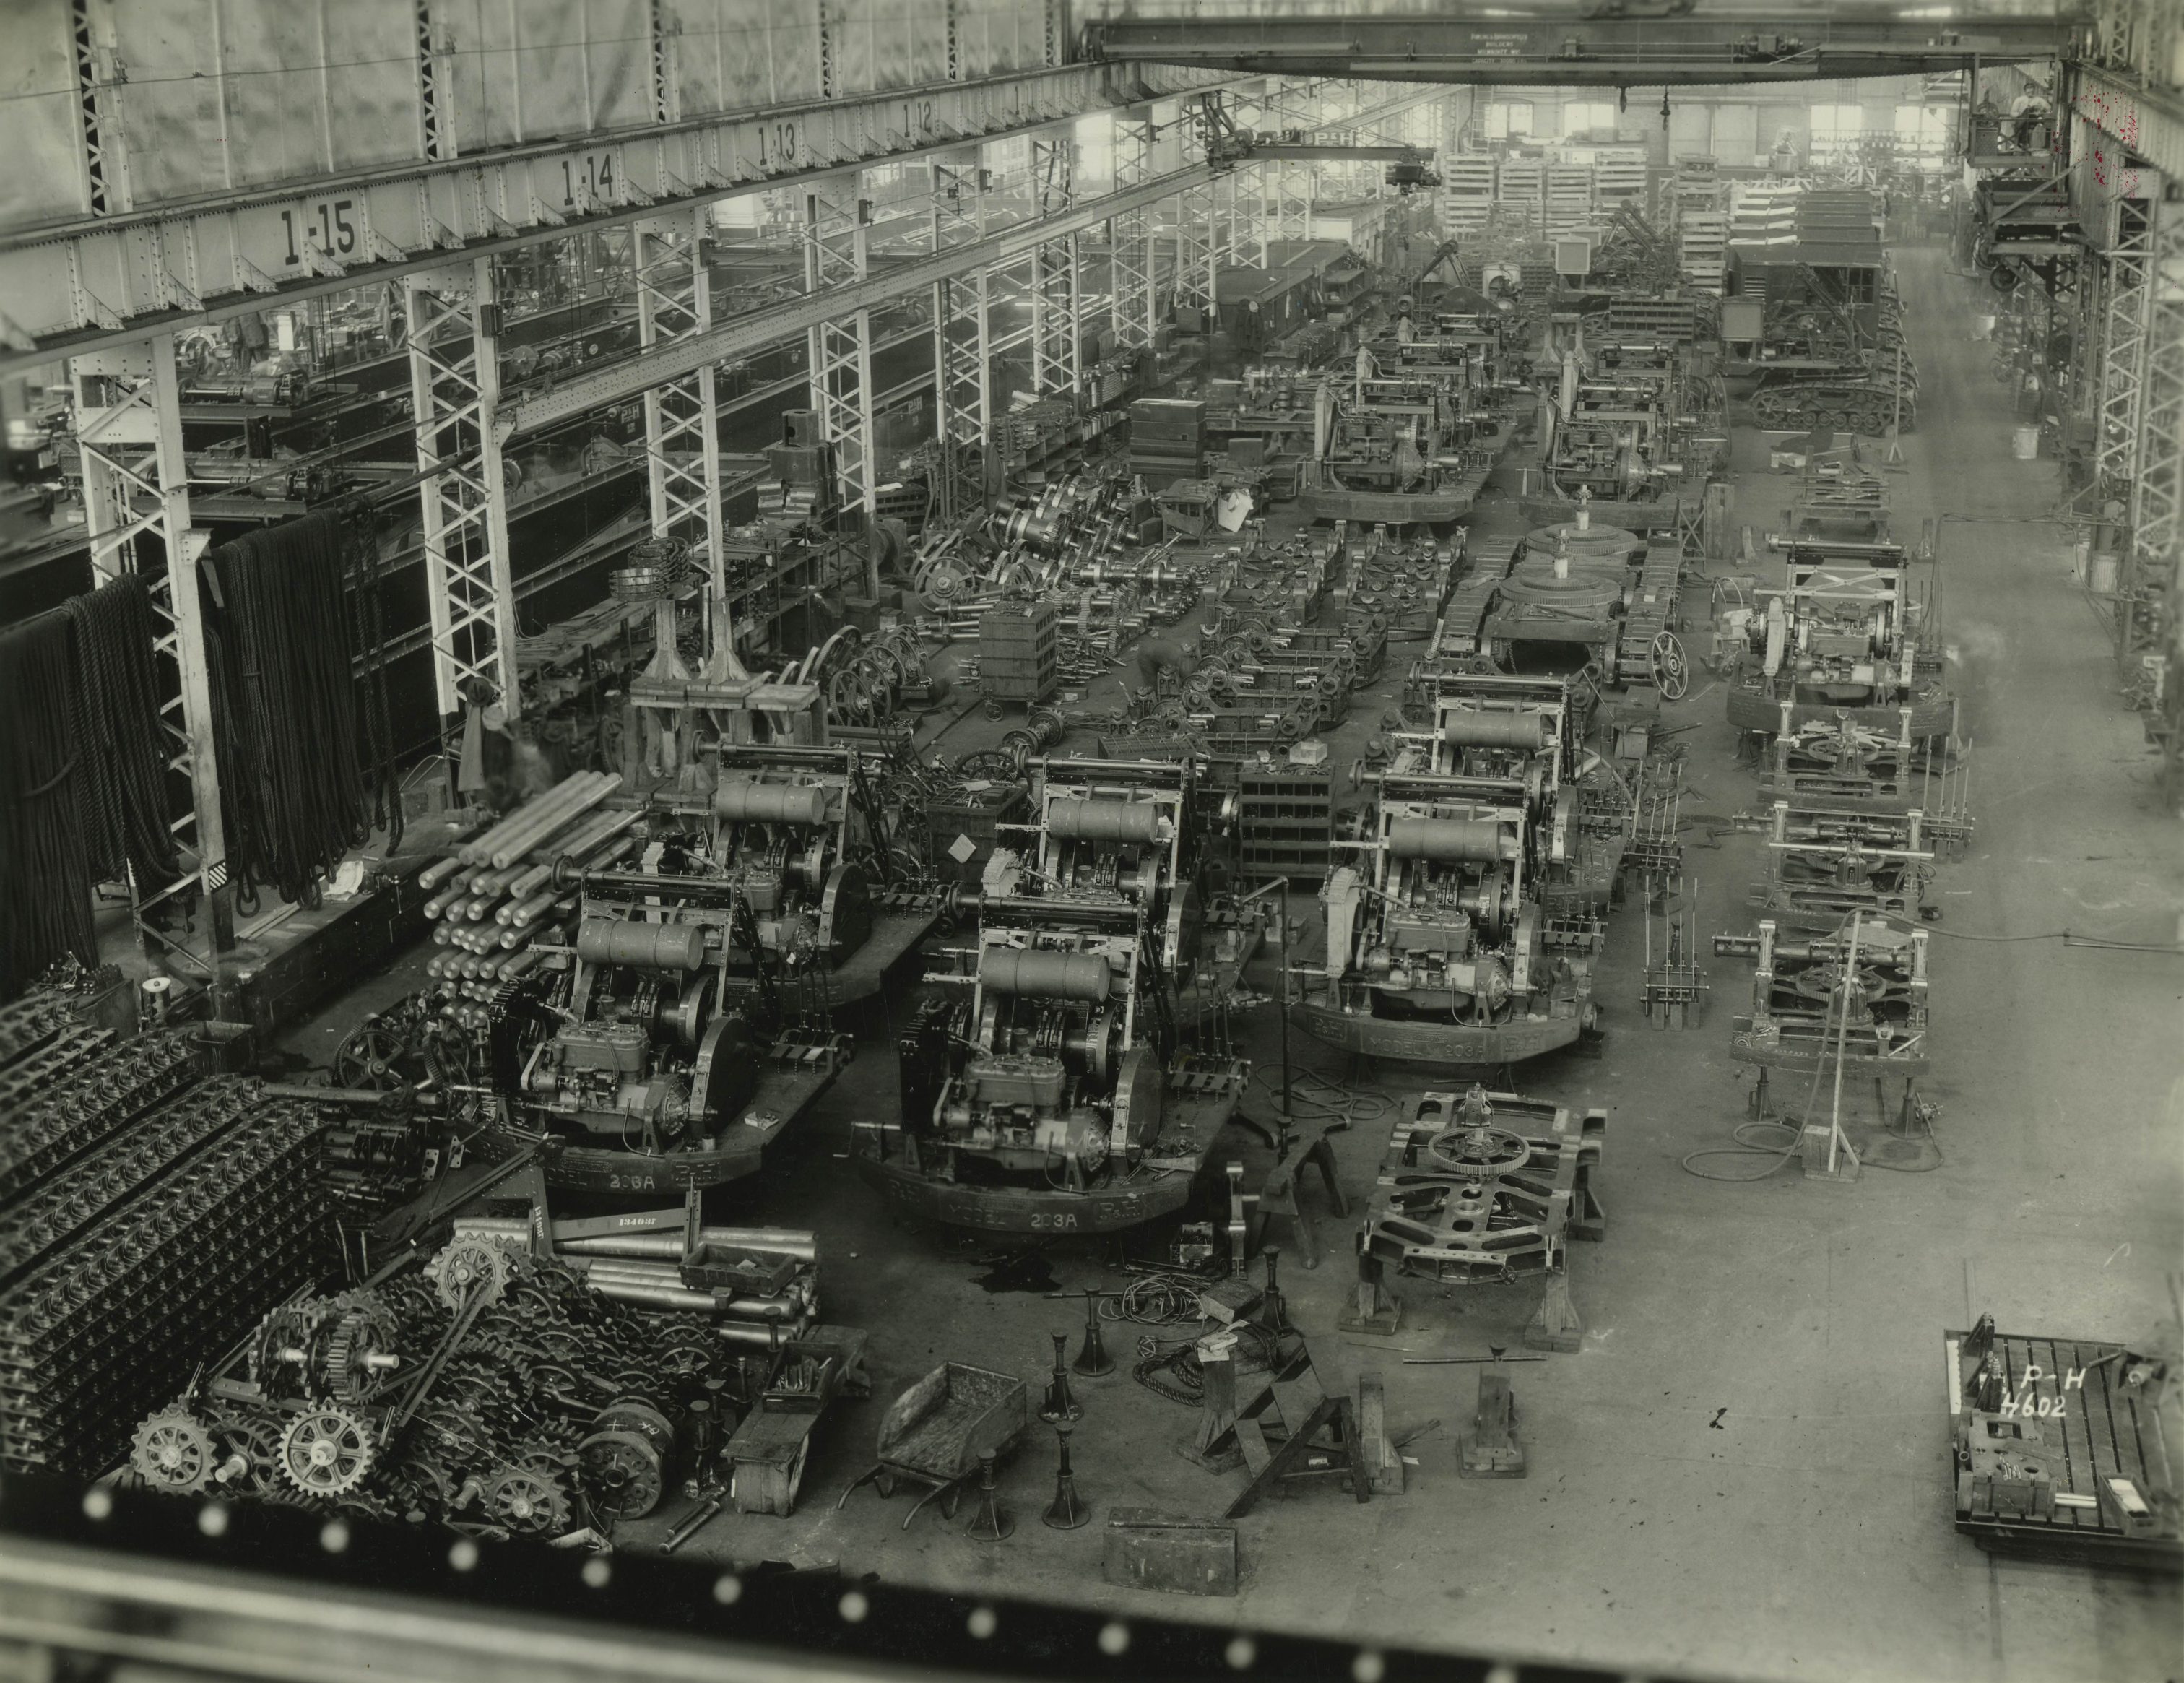 Bird's eye view of the interior of the Pawling and Harnischfeger manufacturing plant located on W. National Avenue. 